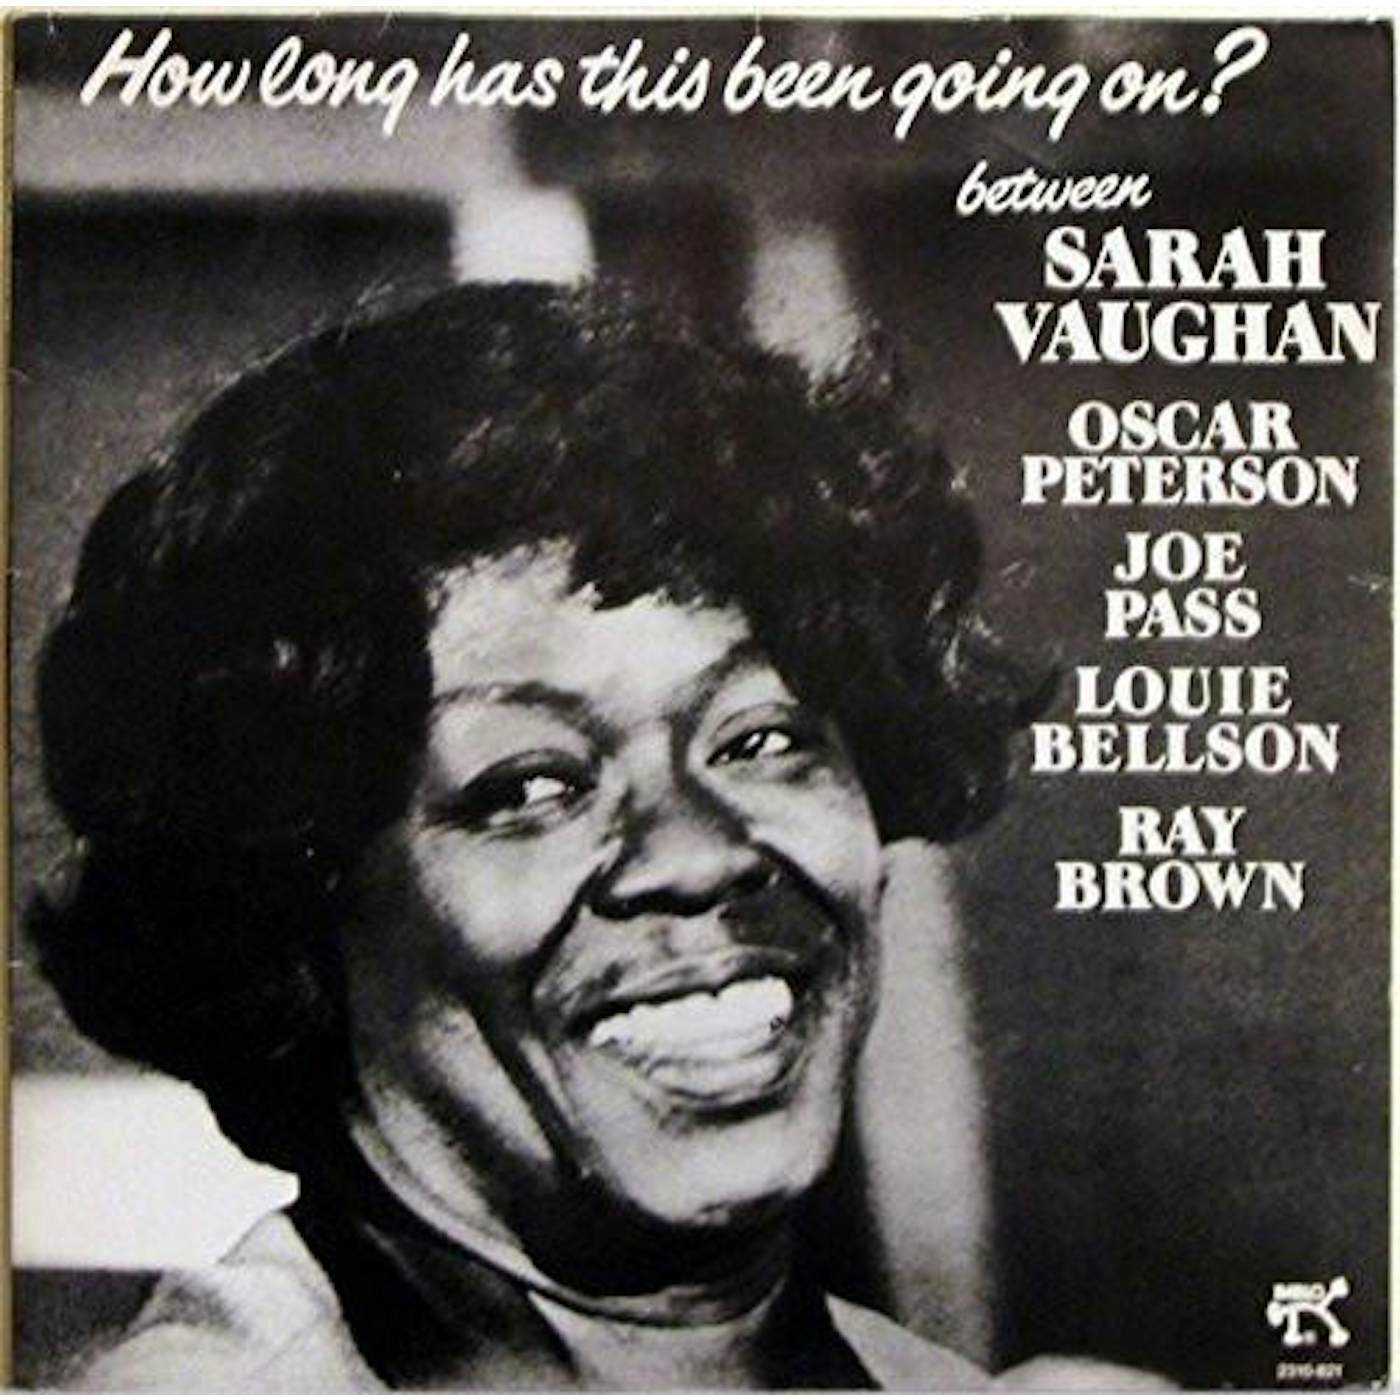 Sarah Vaughan HOW LONG HAS THIS BEEN GOING ON CD